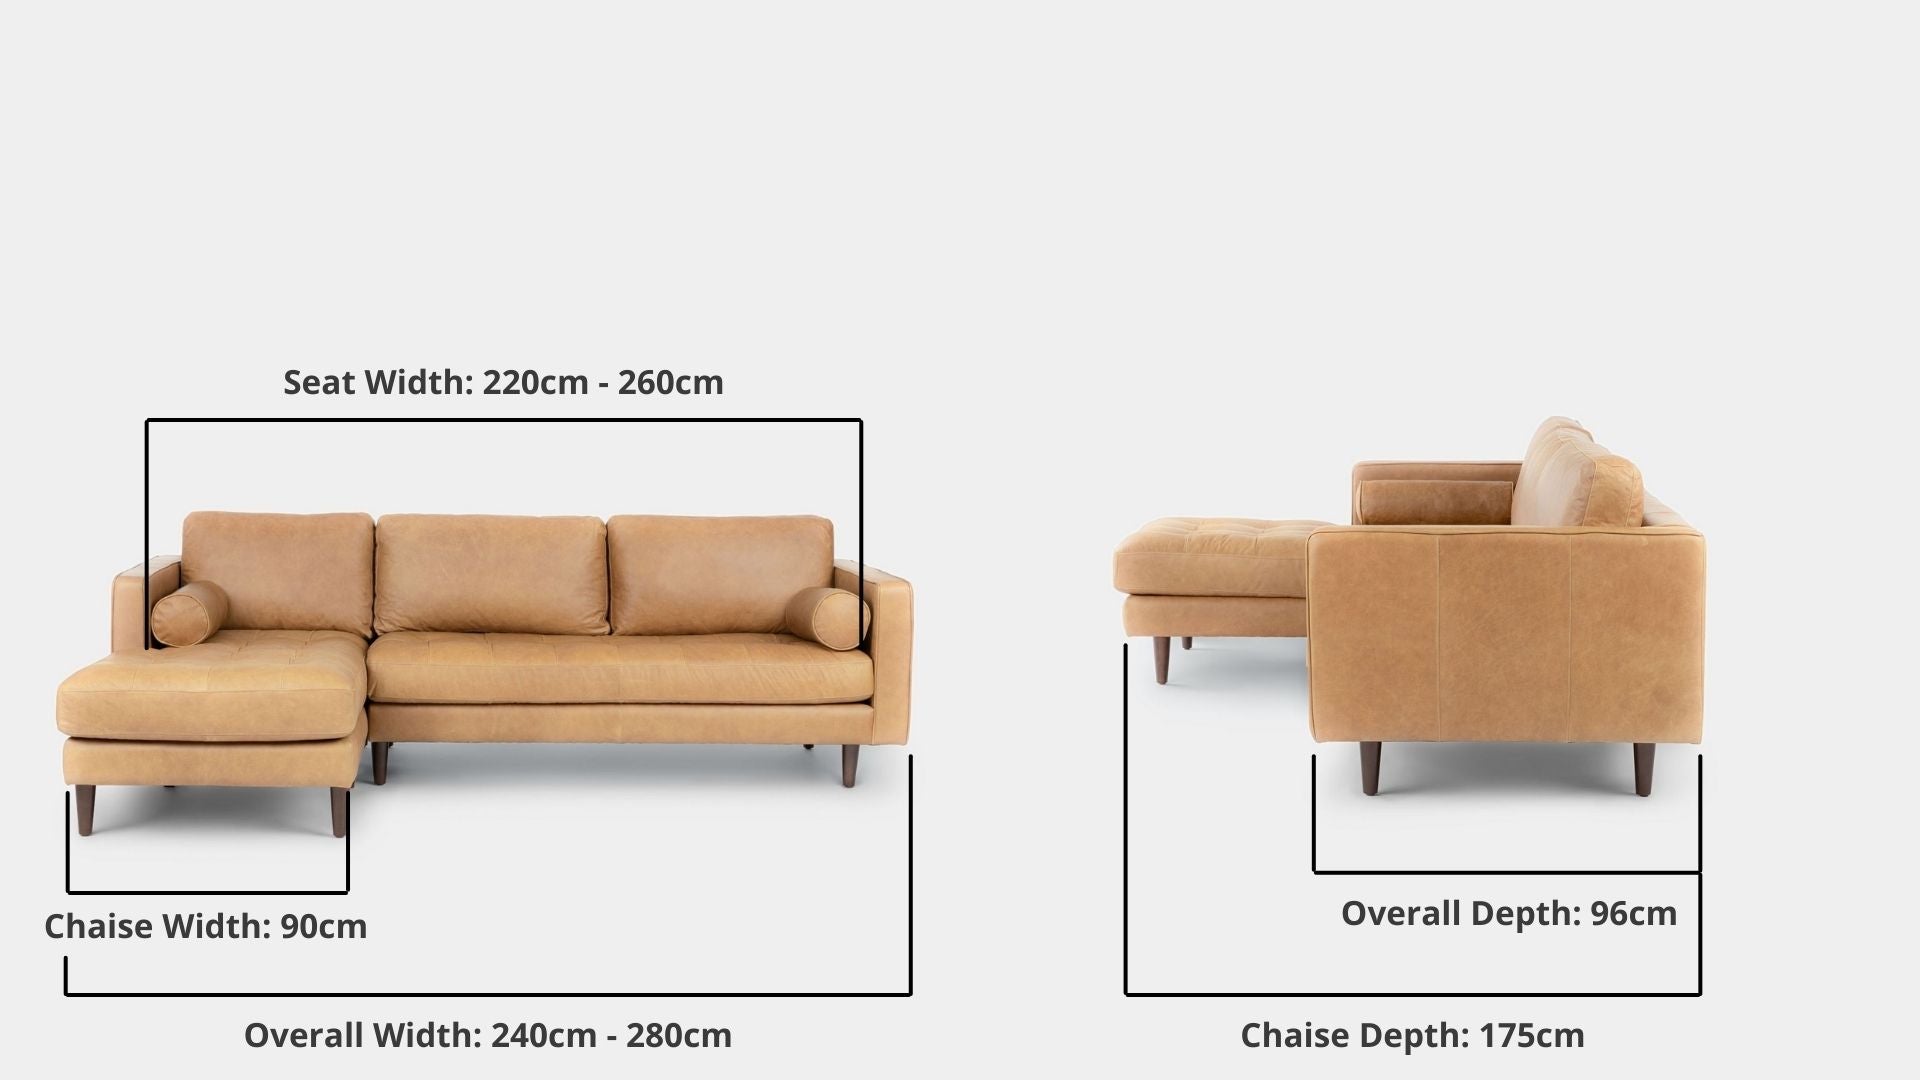 Details the key dimensions in terms of overall width, overall depth and seat width for Castle Full Leather Sectional Sofa